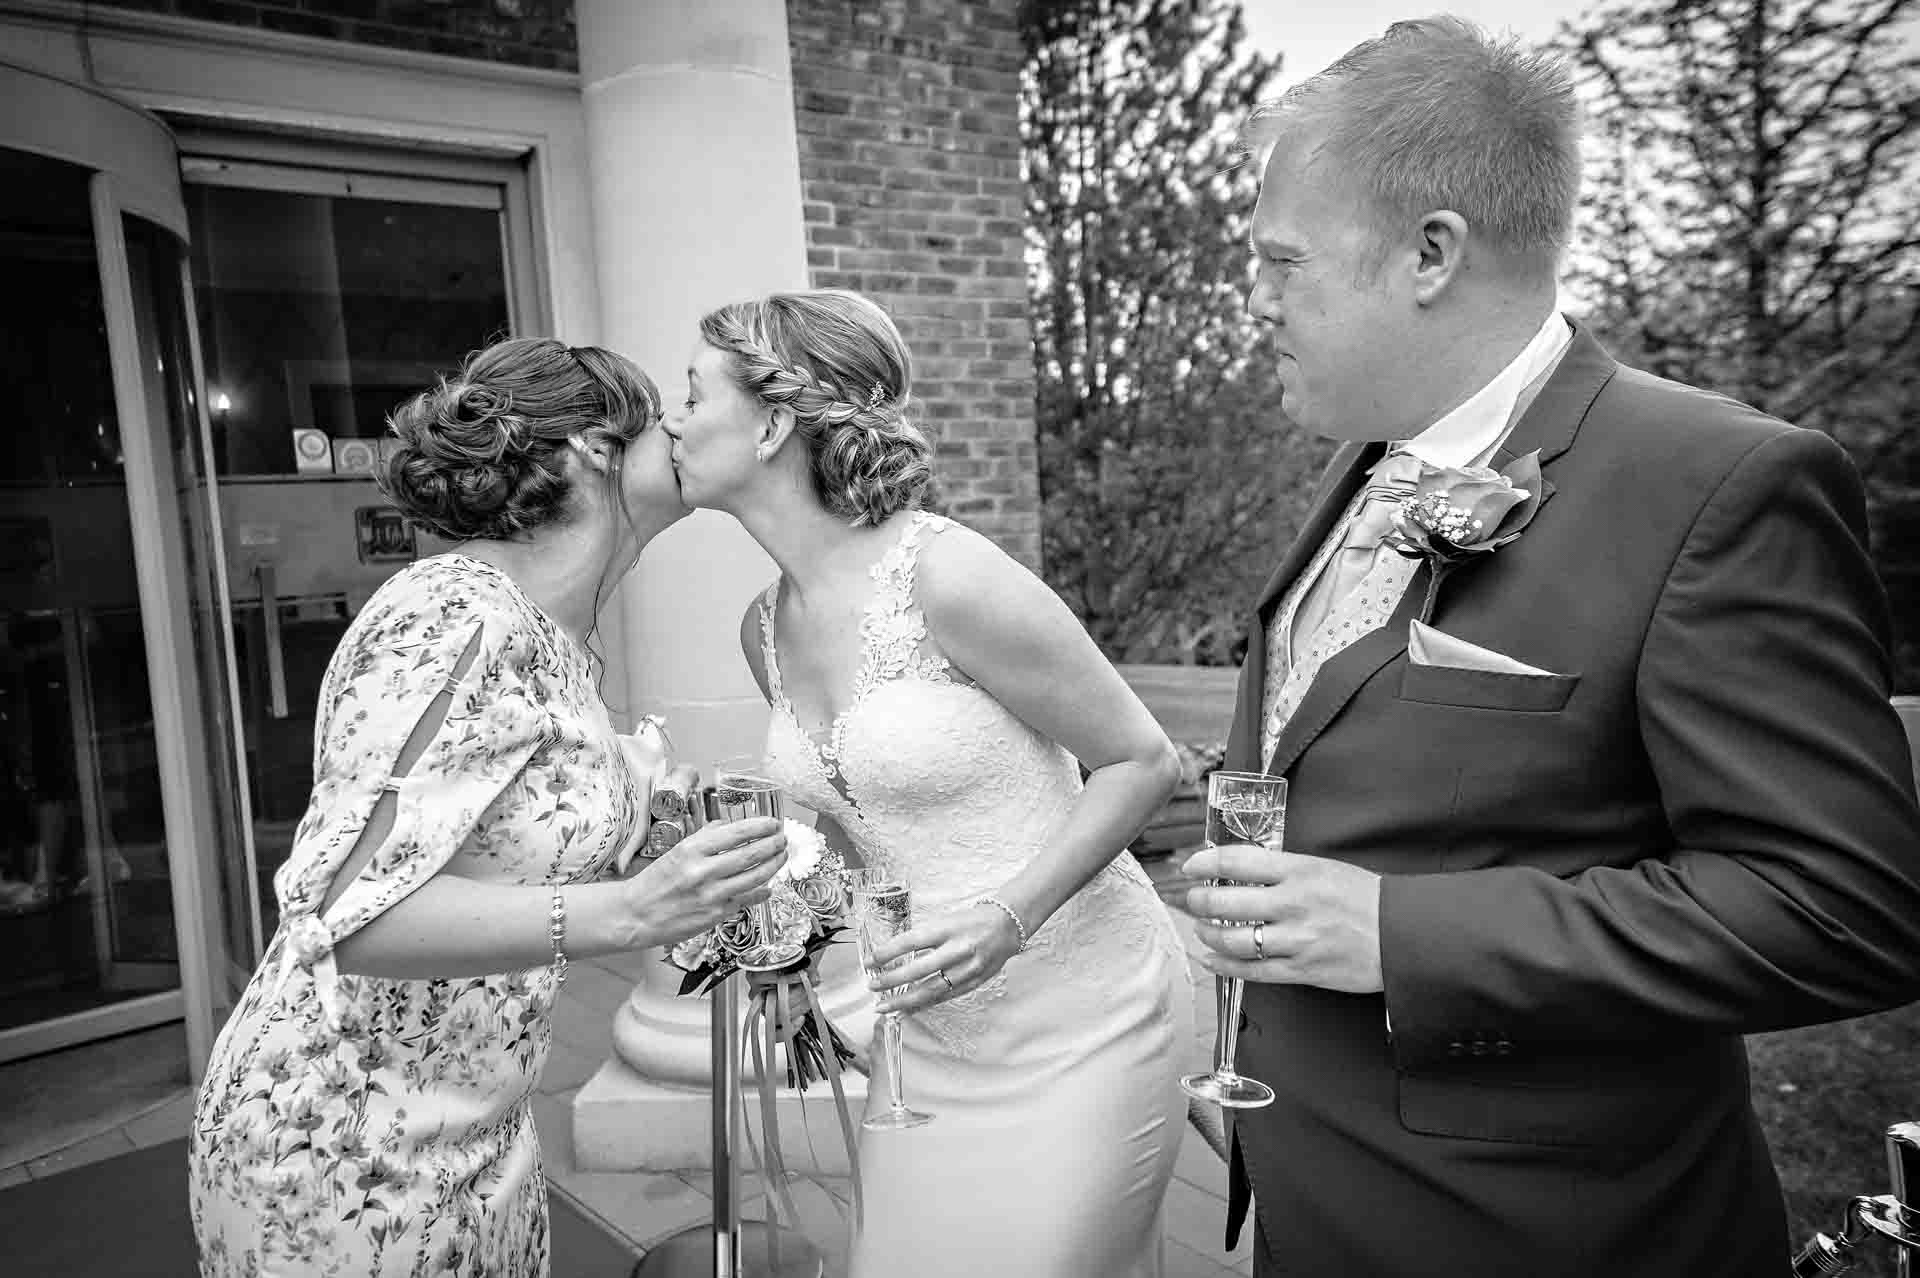 Bride kisses female guest at wedding whilst groom watches